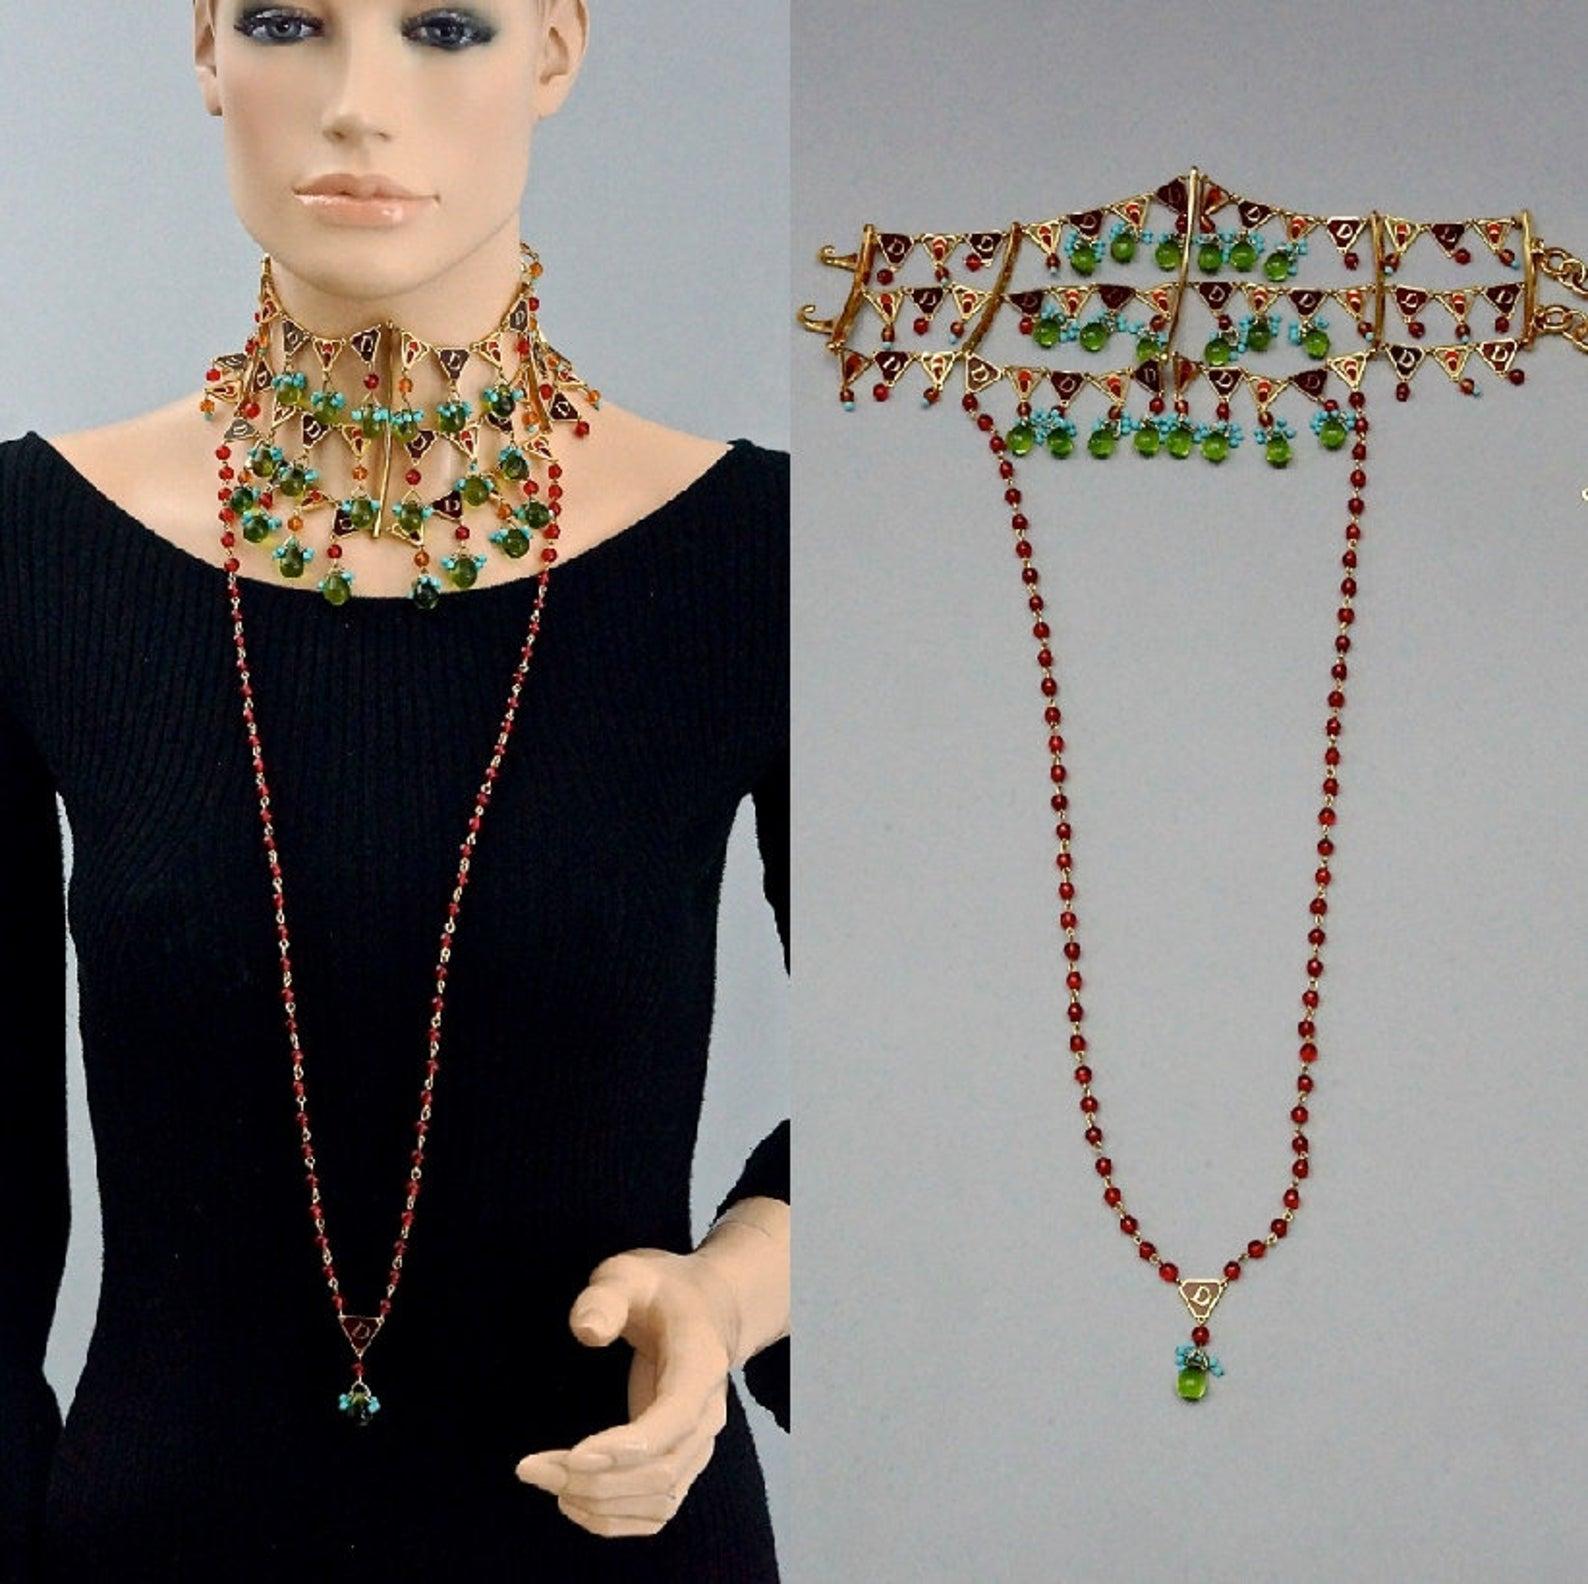 CHRISTIAN DIOR by John Galliano Maasai Poured Glass Choker Necklace

MEASUREMENTS:
Height: 4.92 inches (12.5 cm)
Length of Beaded Strand at the front: 15.94 inches (40.5 cm)
Maximum Wearable Length: 14.76 inches (37.5 cm) adjustable

FEATURES:
-